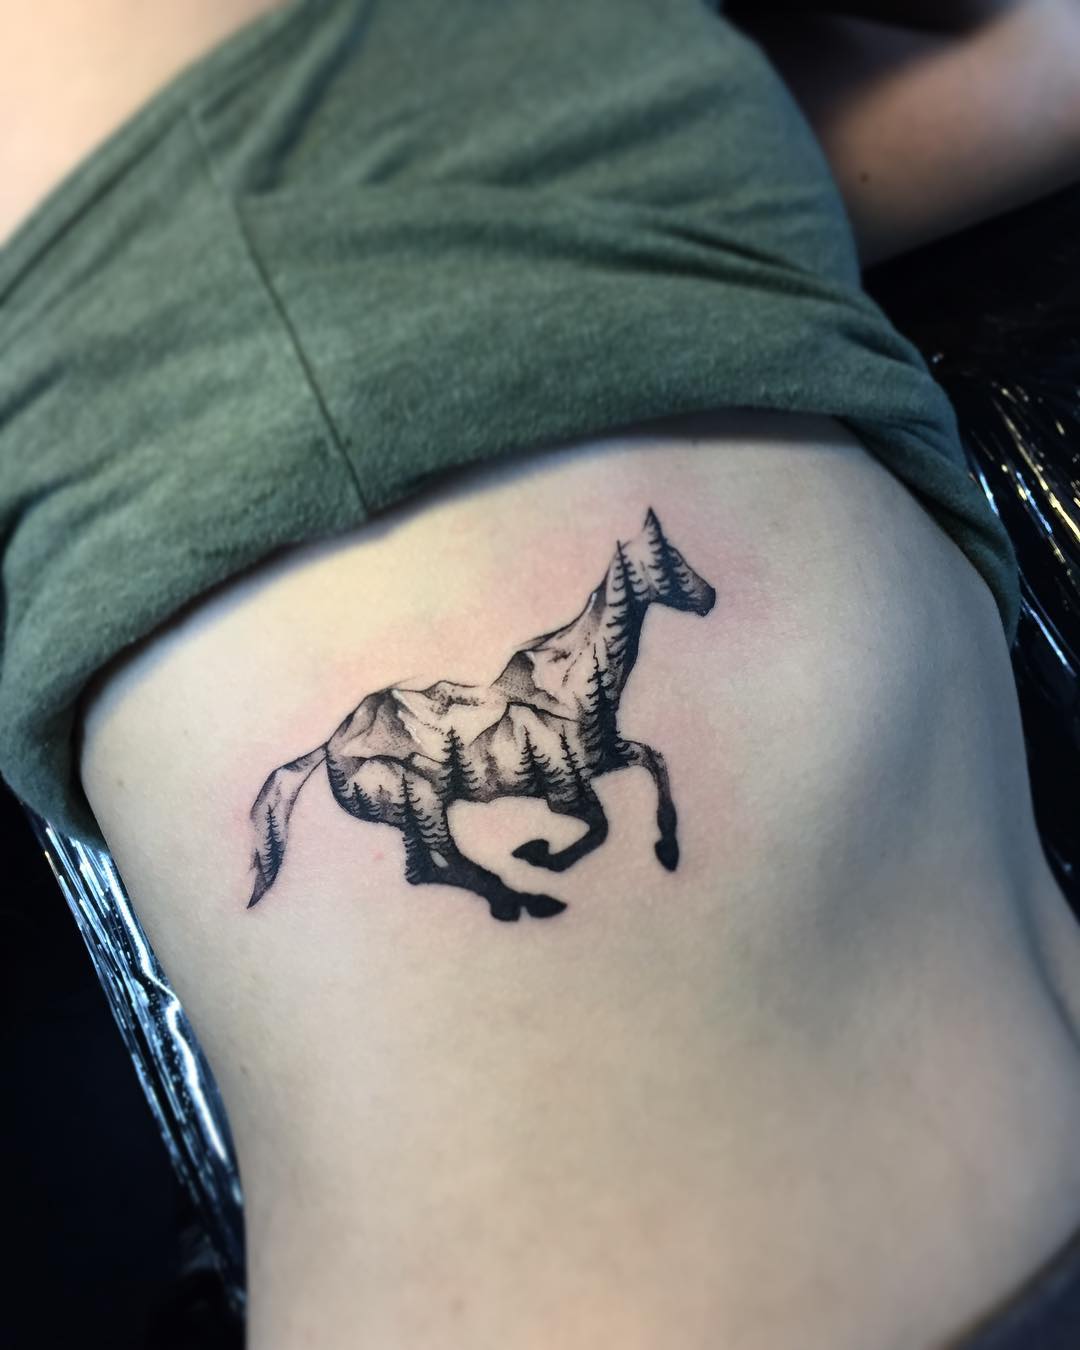 Artistic horse tattoo for nature lover.